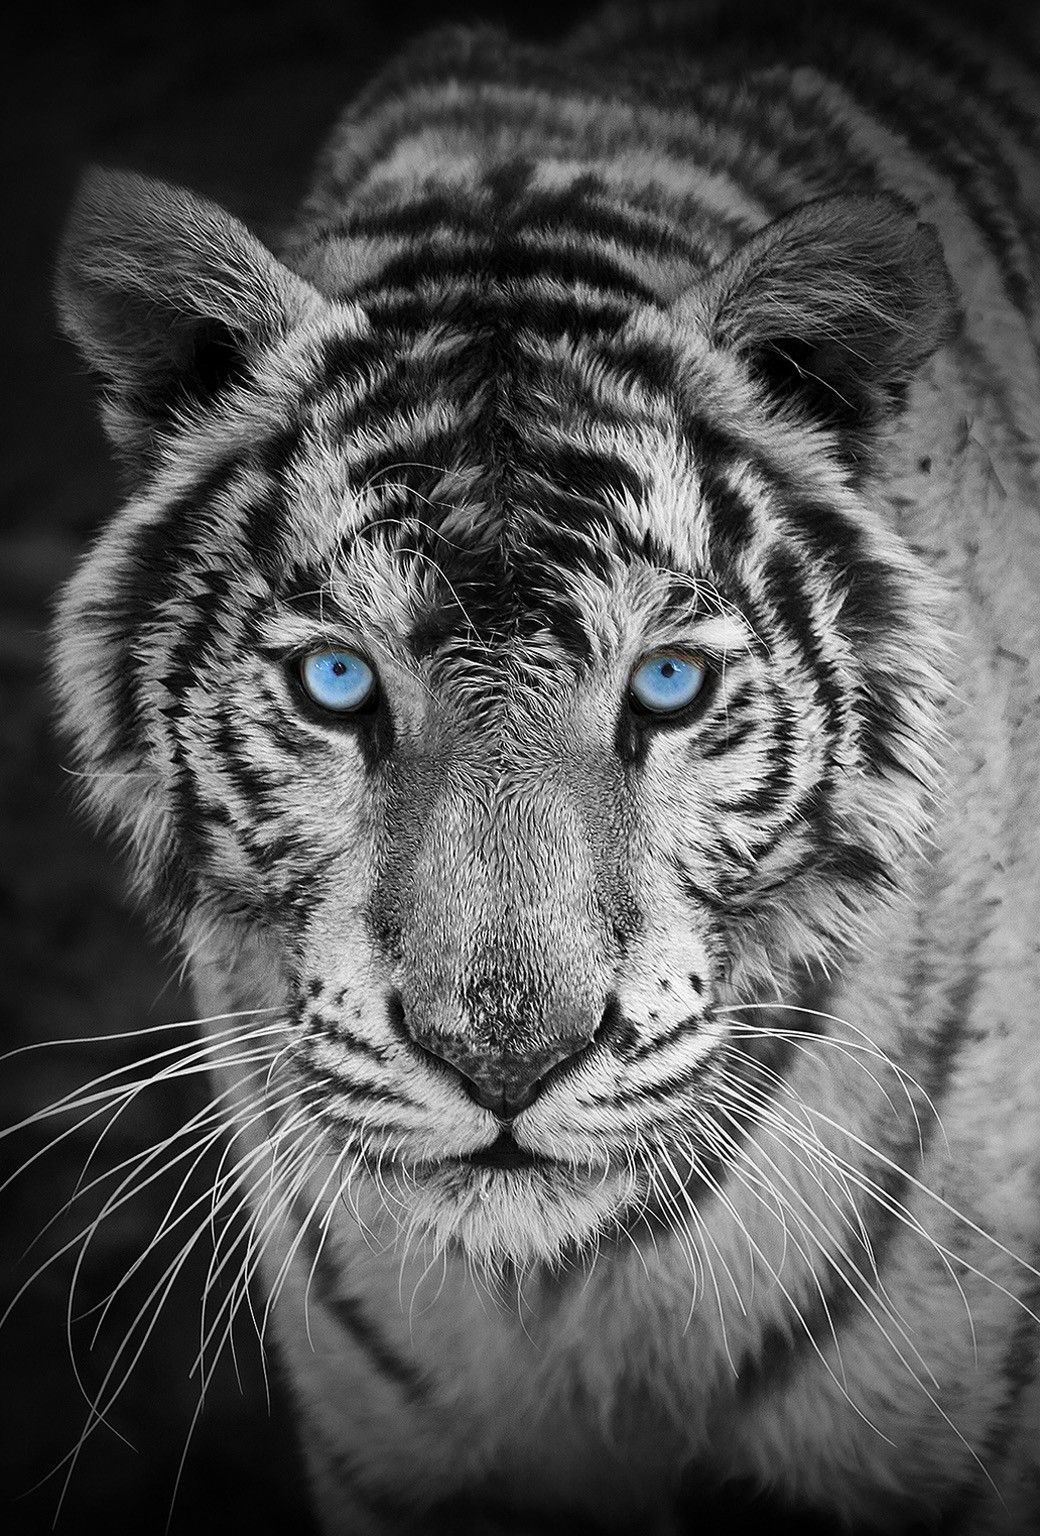 10 Wild Animals Wallpapers For The Iphone 6 - White Tiger Wallpaper Iphone  - 1040x1536 Wallpaper 